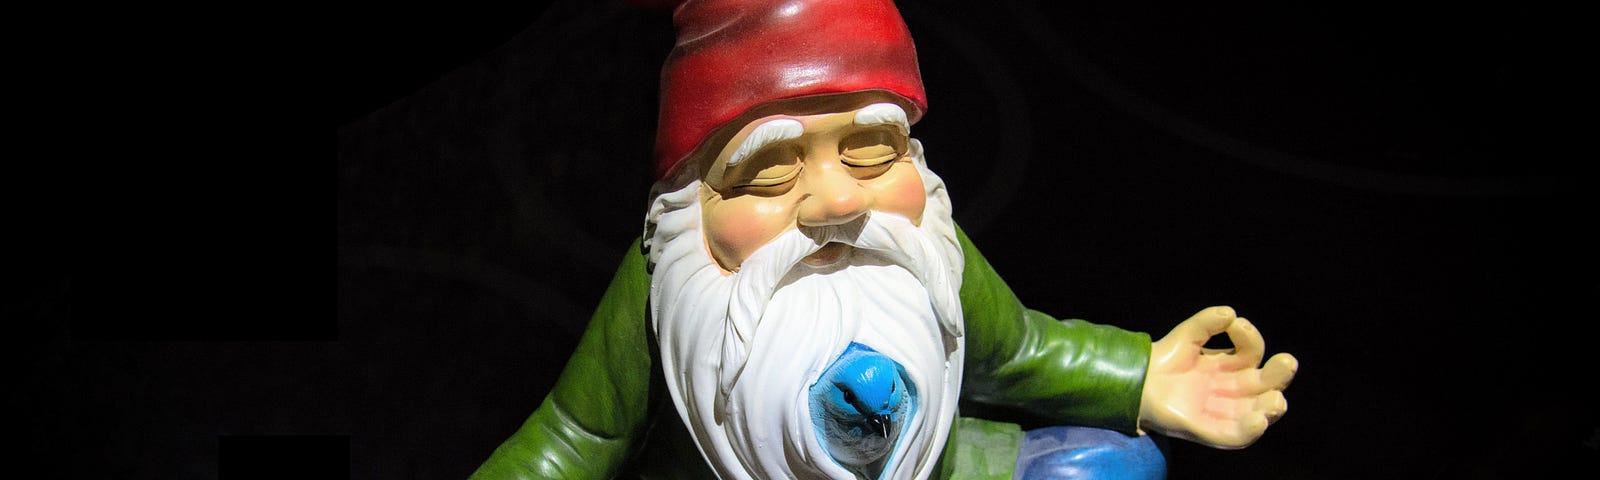 Garden gnome in blue pants, green jacket, red cap, long white beard, sitting cross legged with hands in meditation pose.